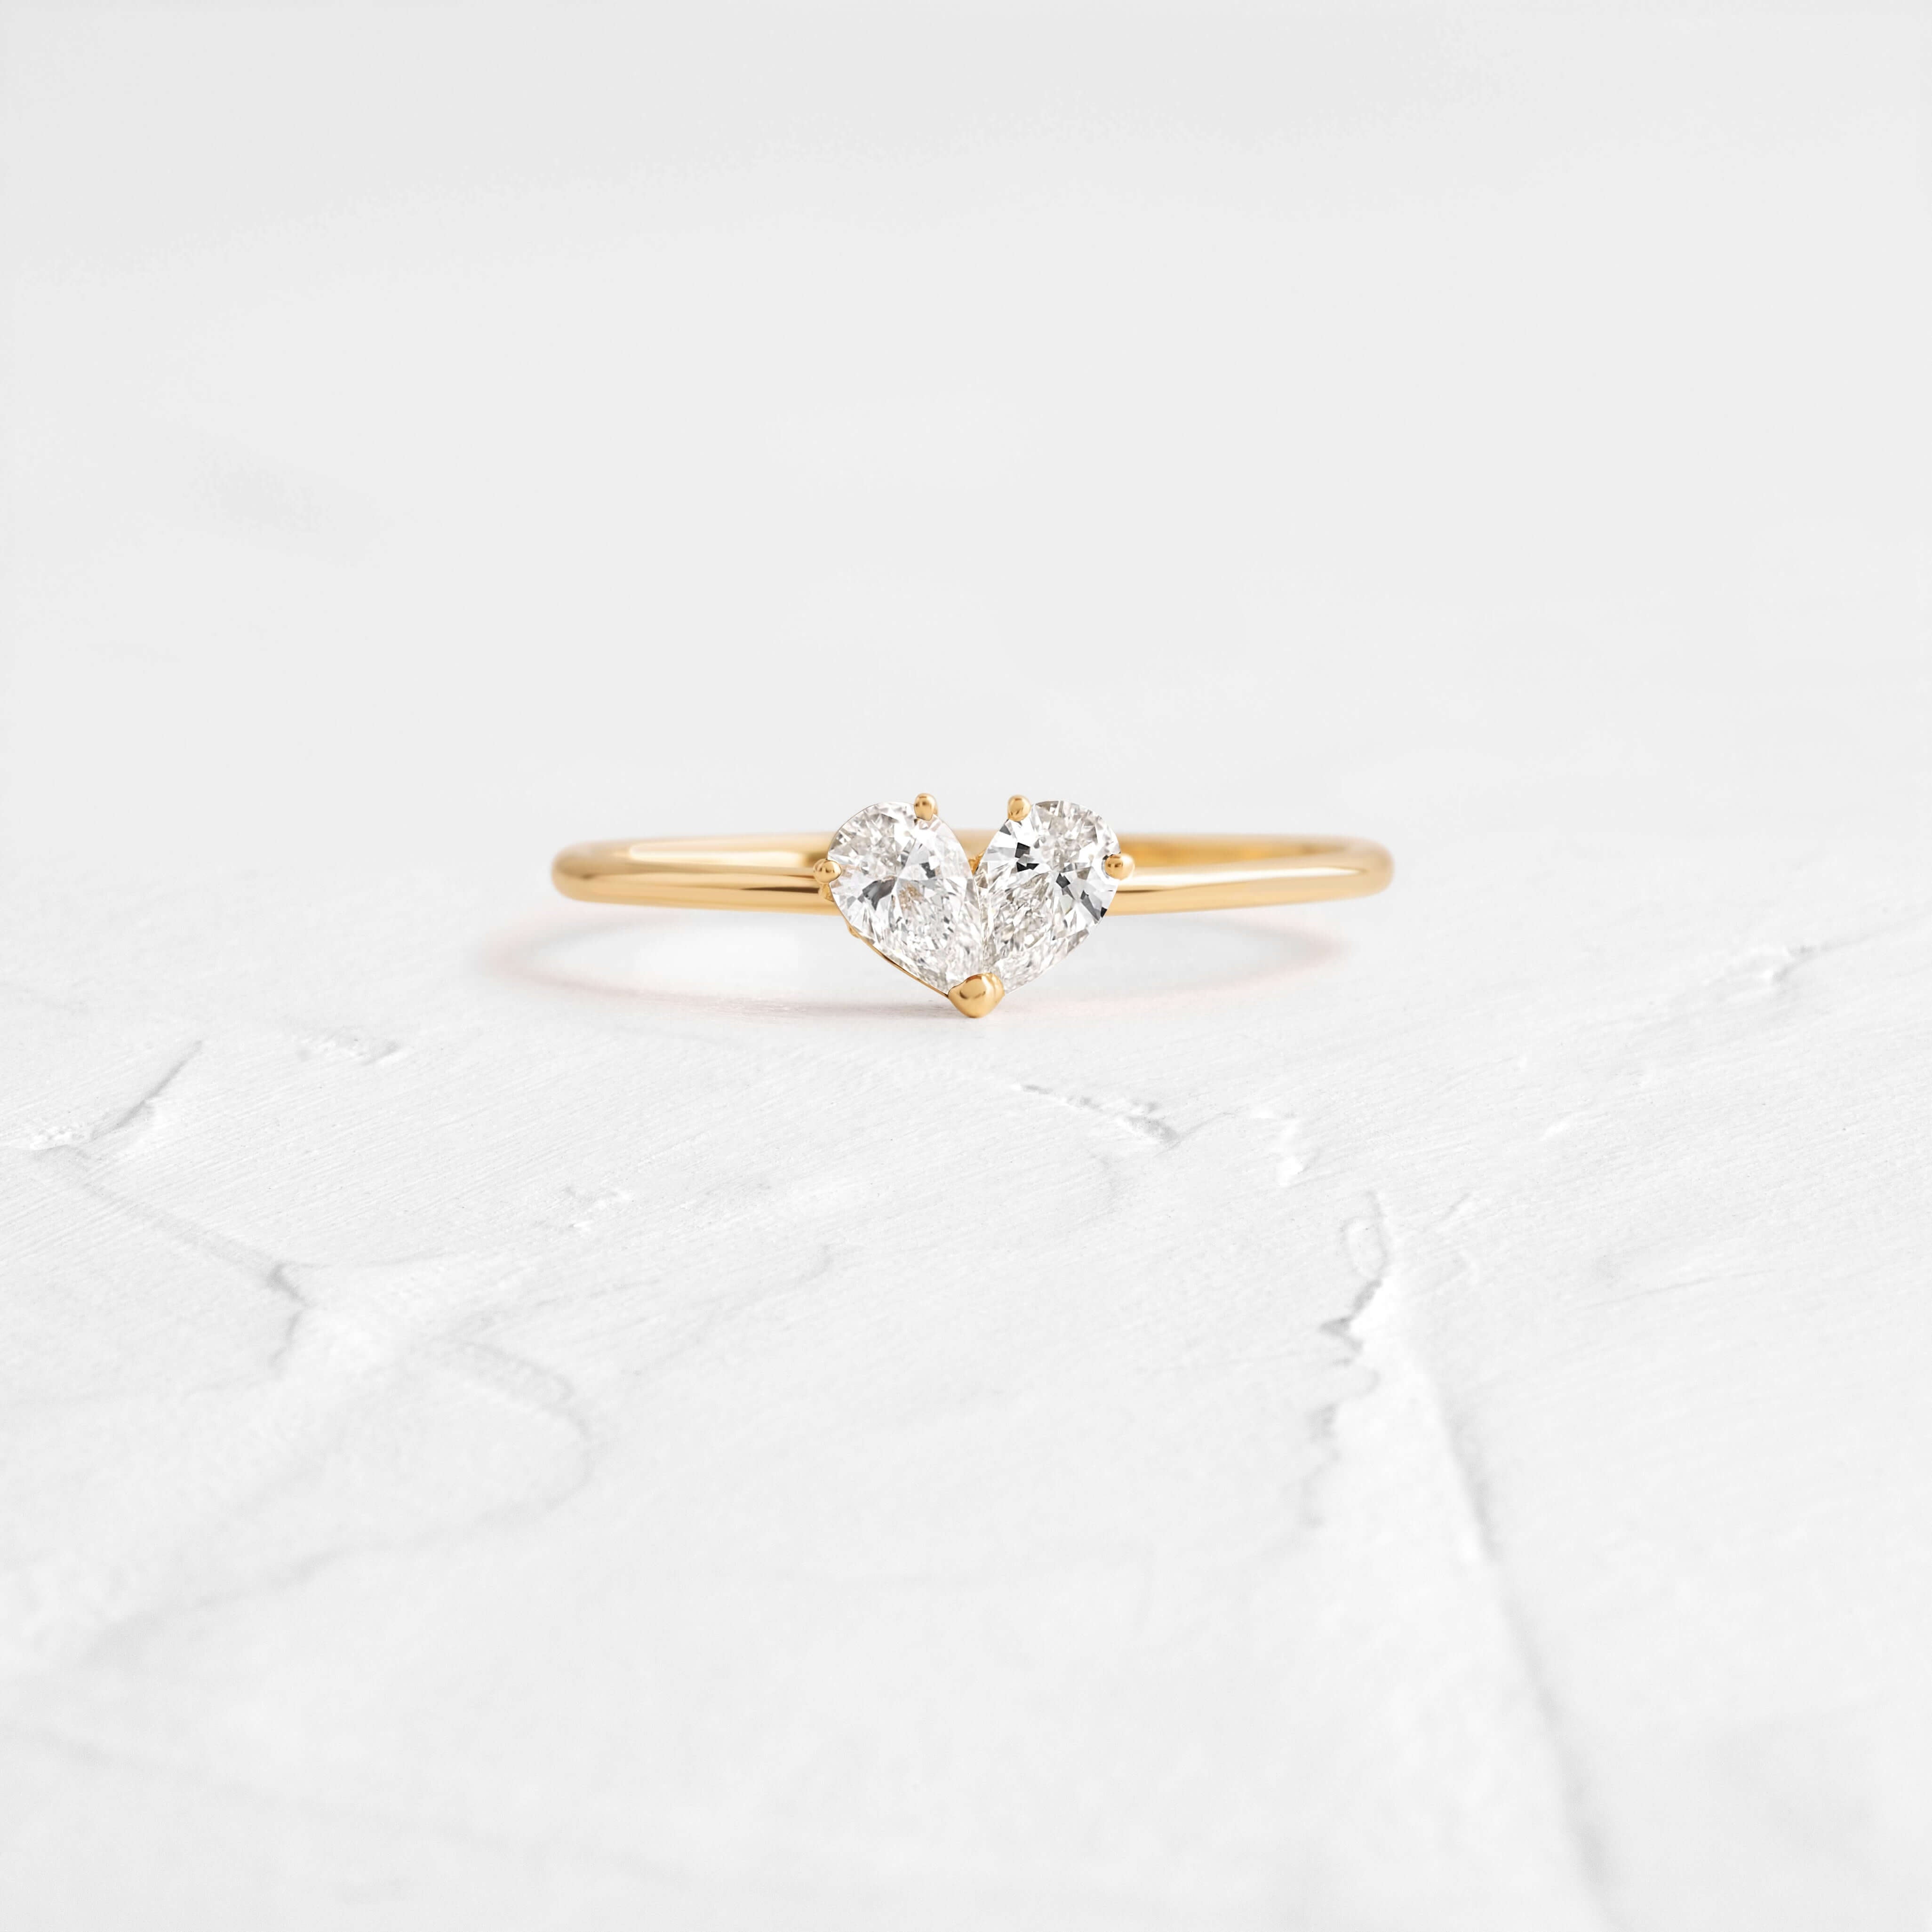 Wedding Ring Order : We have the guide to what goes first!